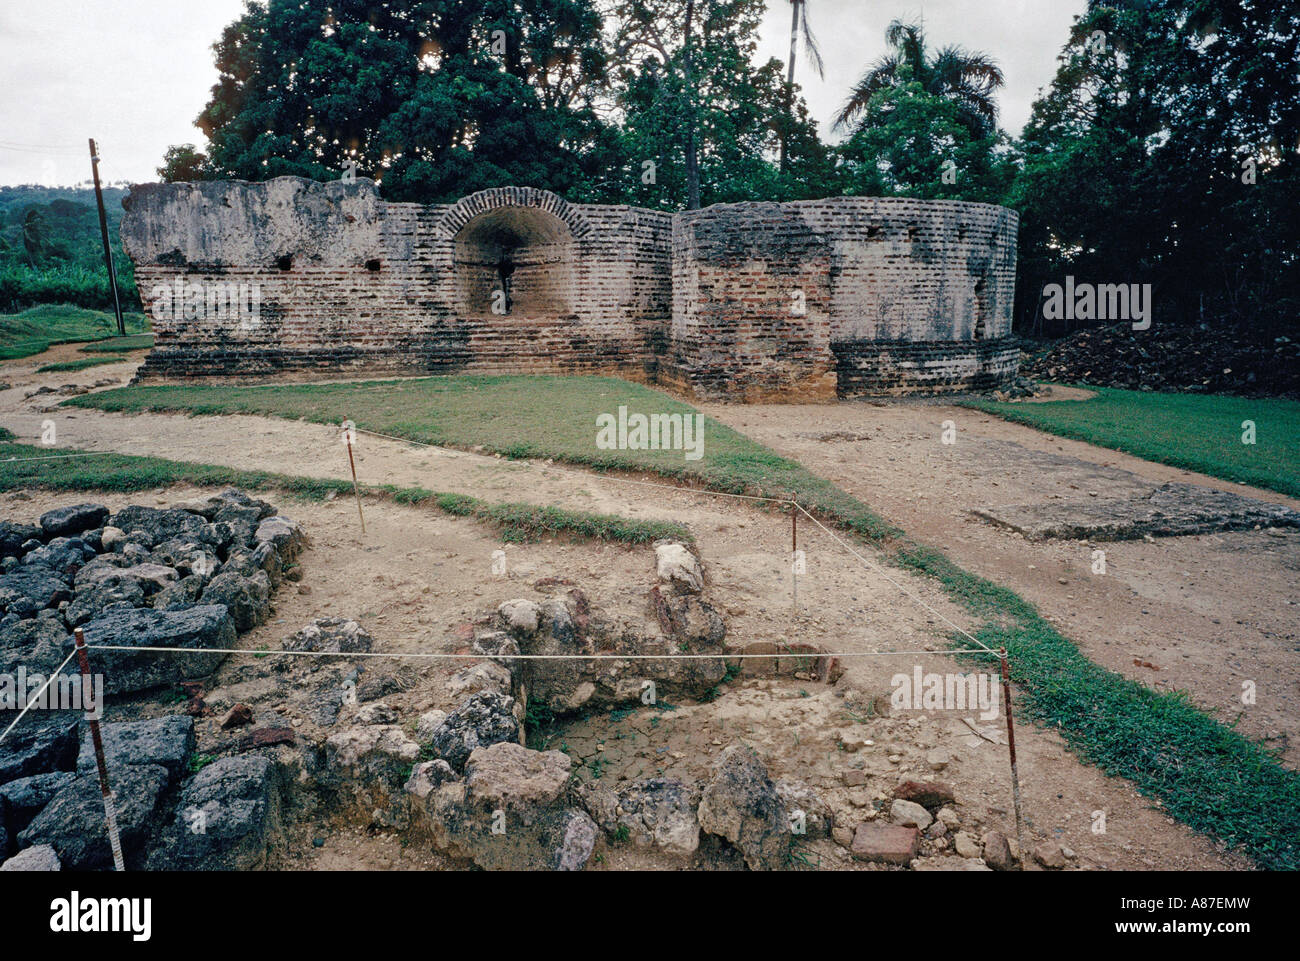 Ruins of an old fortification at the archaeological site of Concepción de la Vega near the town of La Vega Dominican Republic Stock Photo